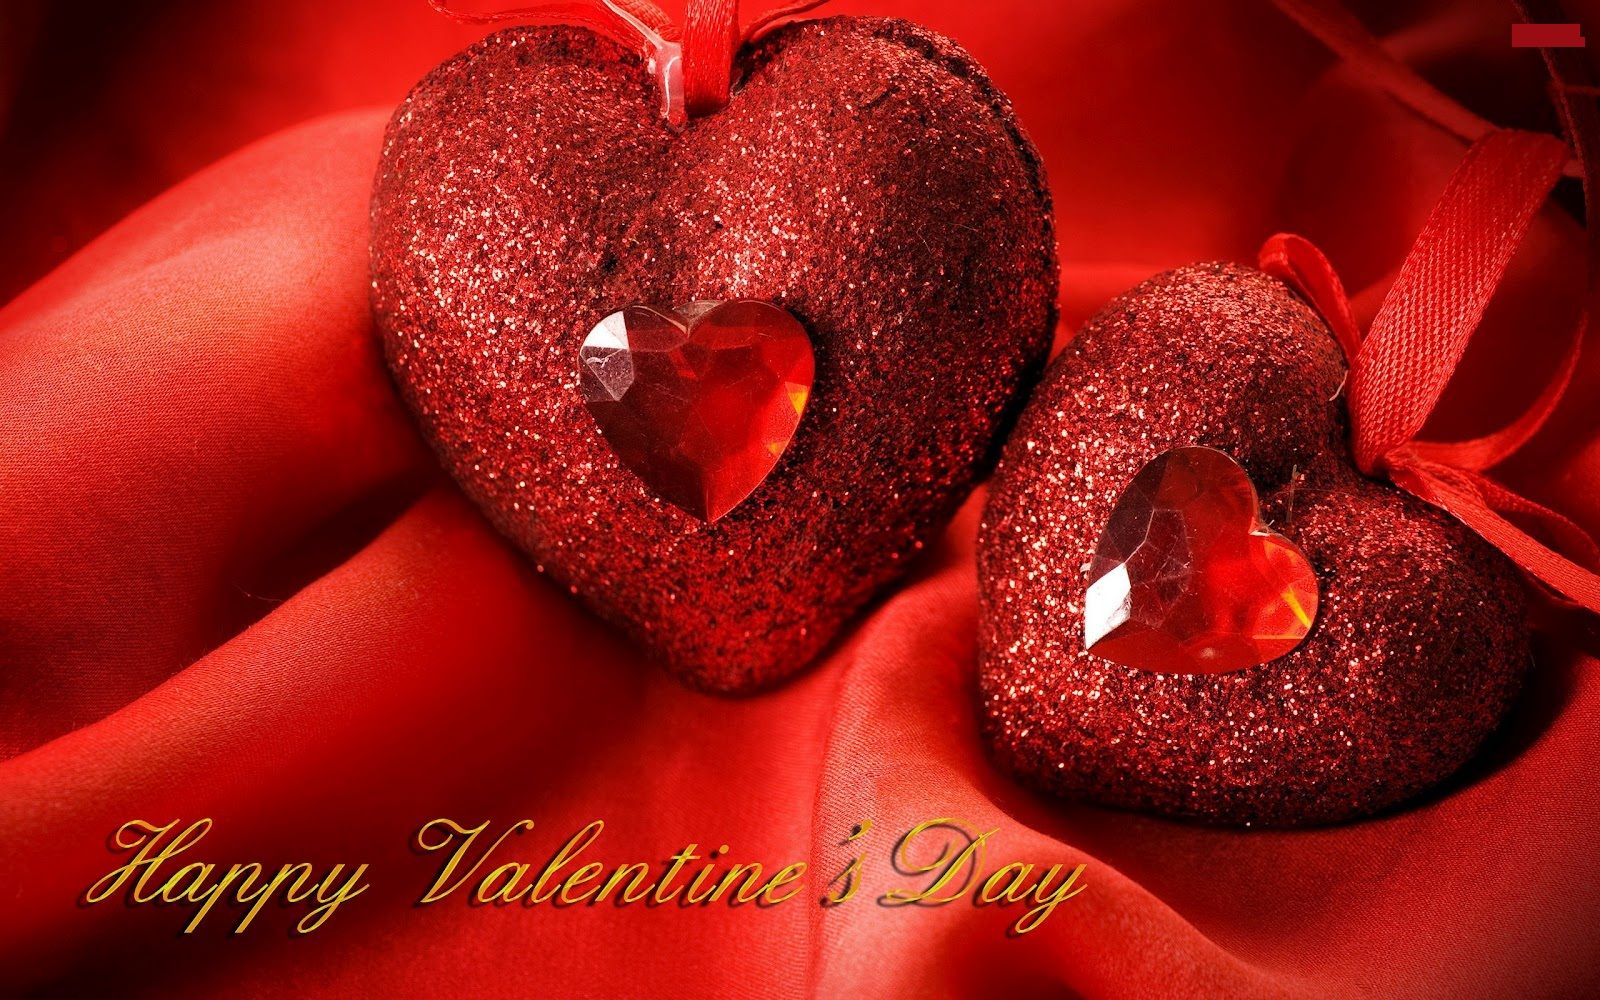 Valentines Day Quotes Image SMS Wallpaper Text Messages. Happy Valentines Day Cards Wishes Greetings